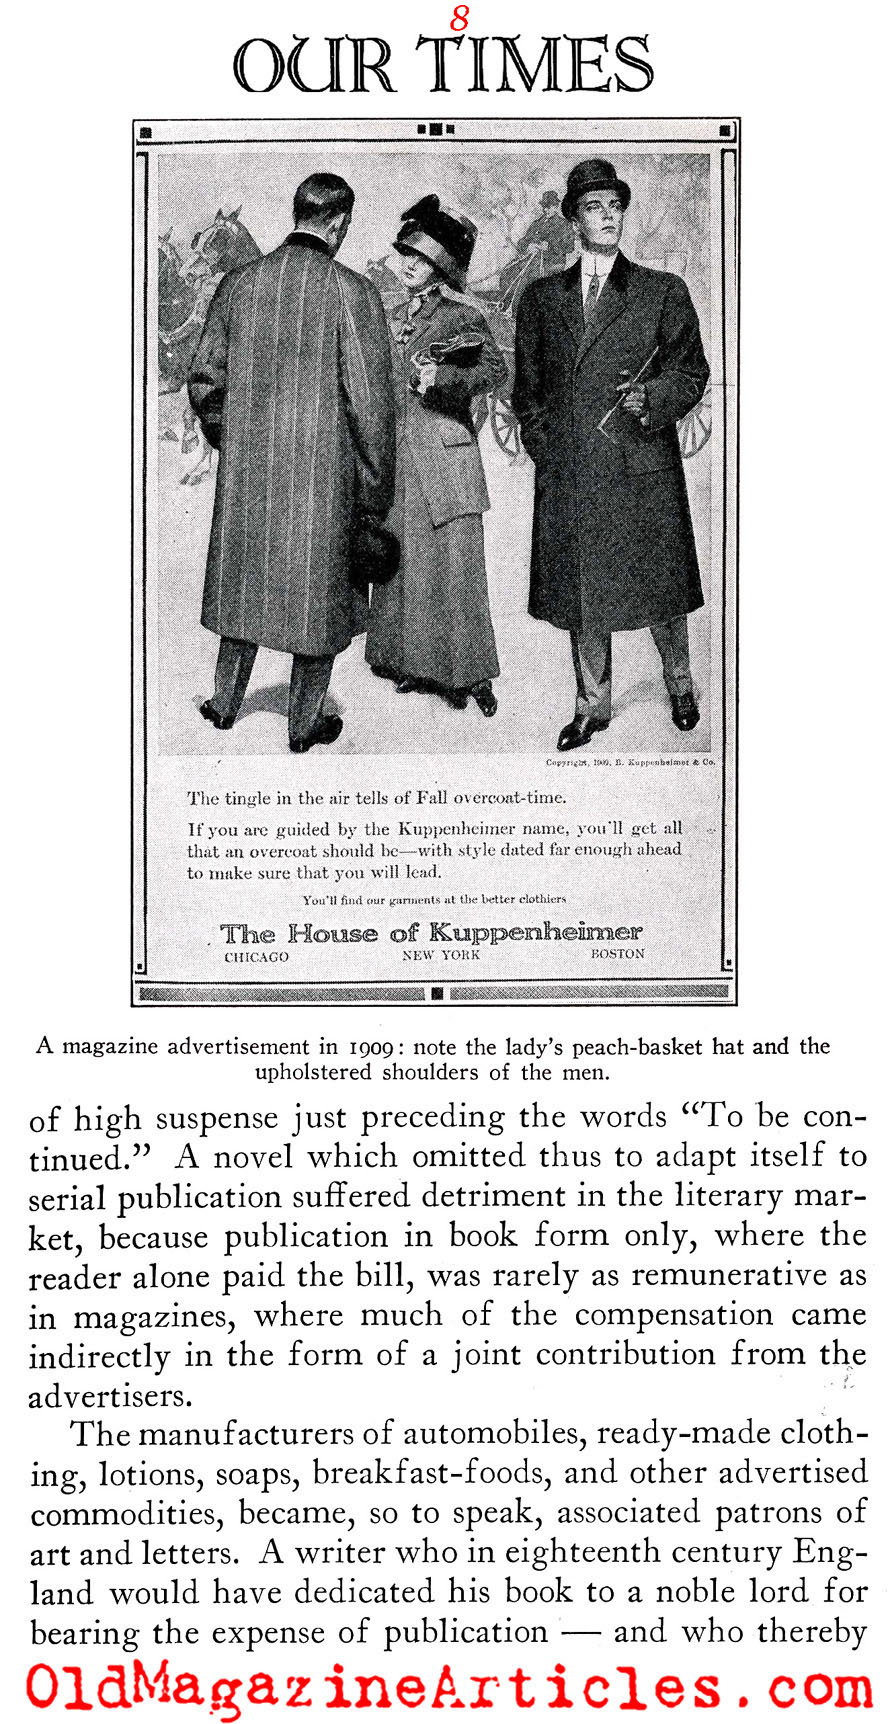 ''Art Finds A Patron'' (Our Times, 1936)